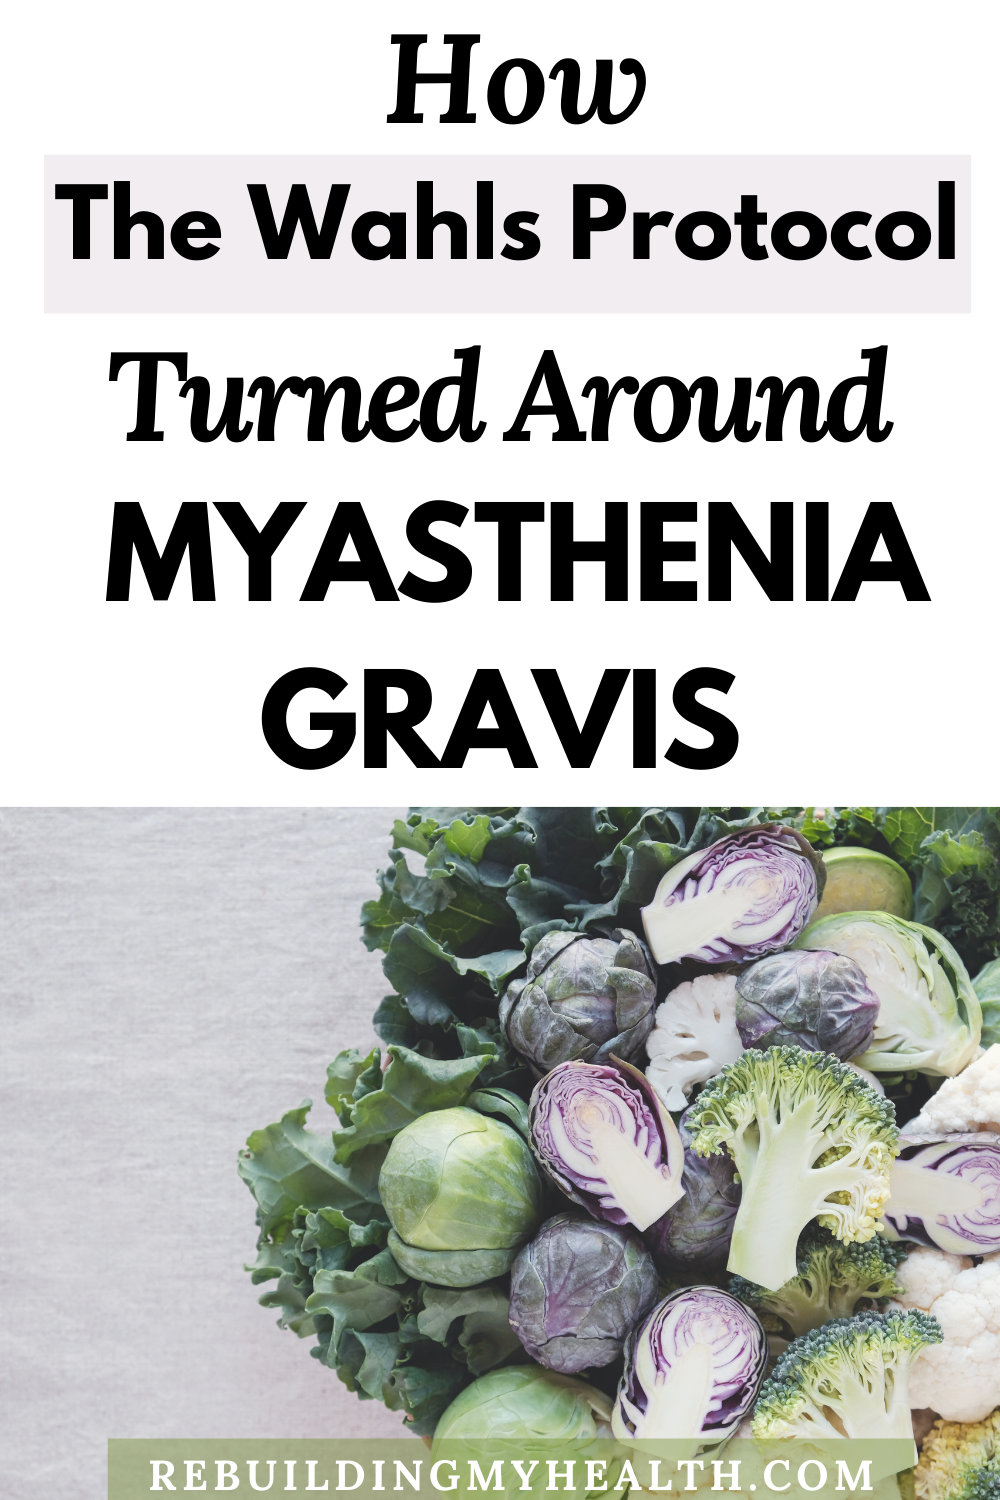 An Arizona woman turned around her myasthenia gravis symptoms with diet, nutrition and exercise as part of the Wahls Protocol.